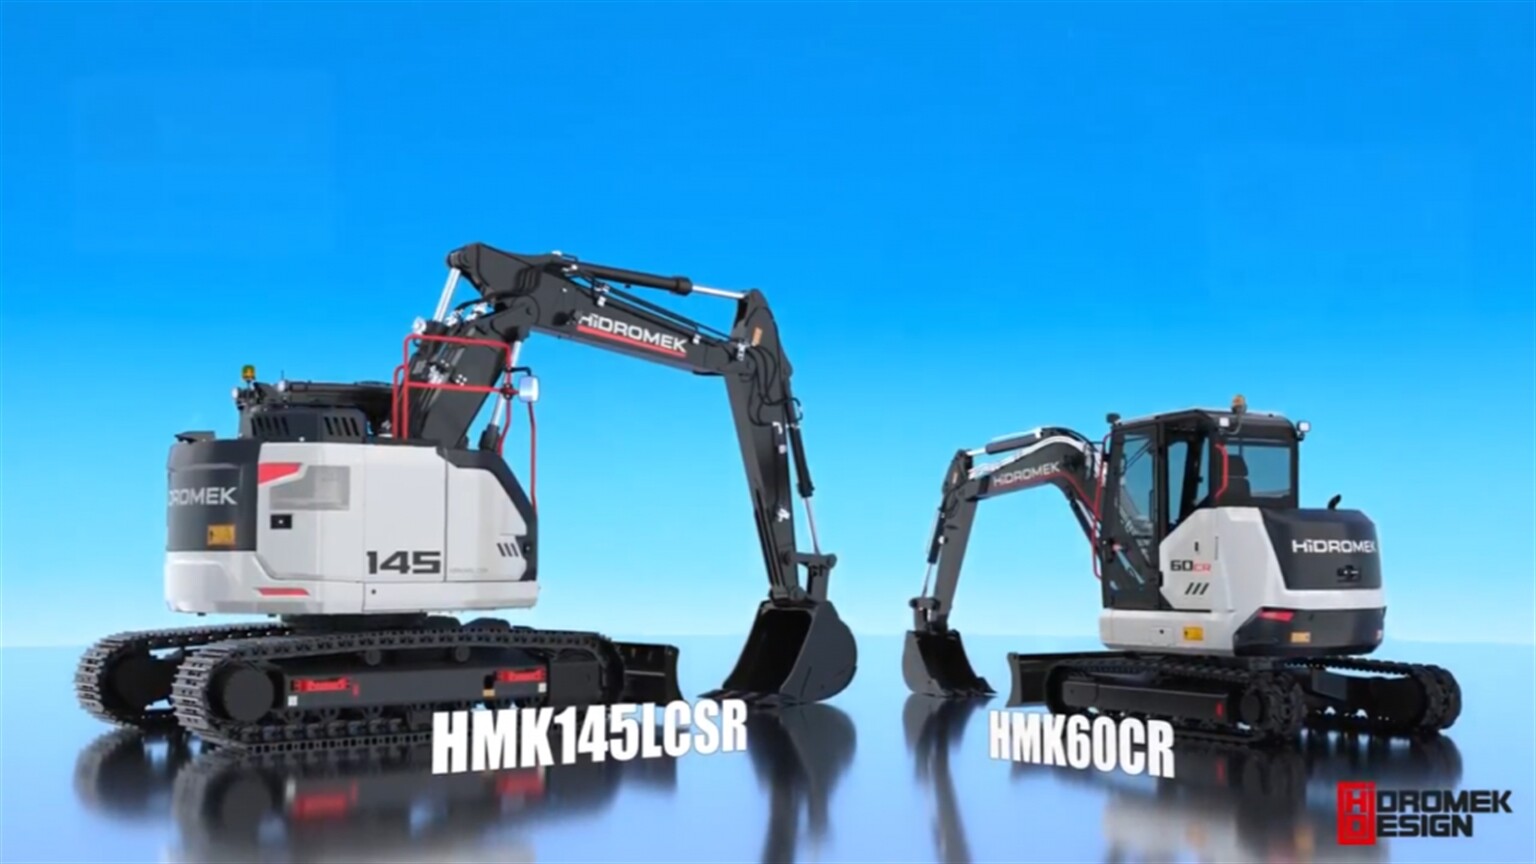 Exciting new Compact kit from Hidromek to star at Intermat